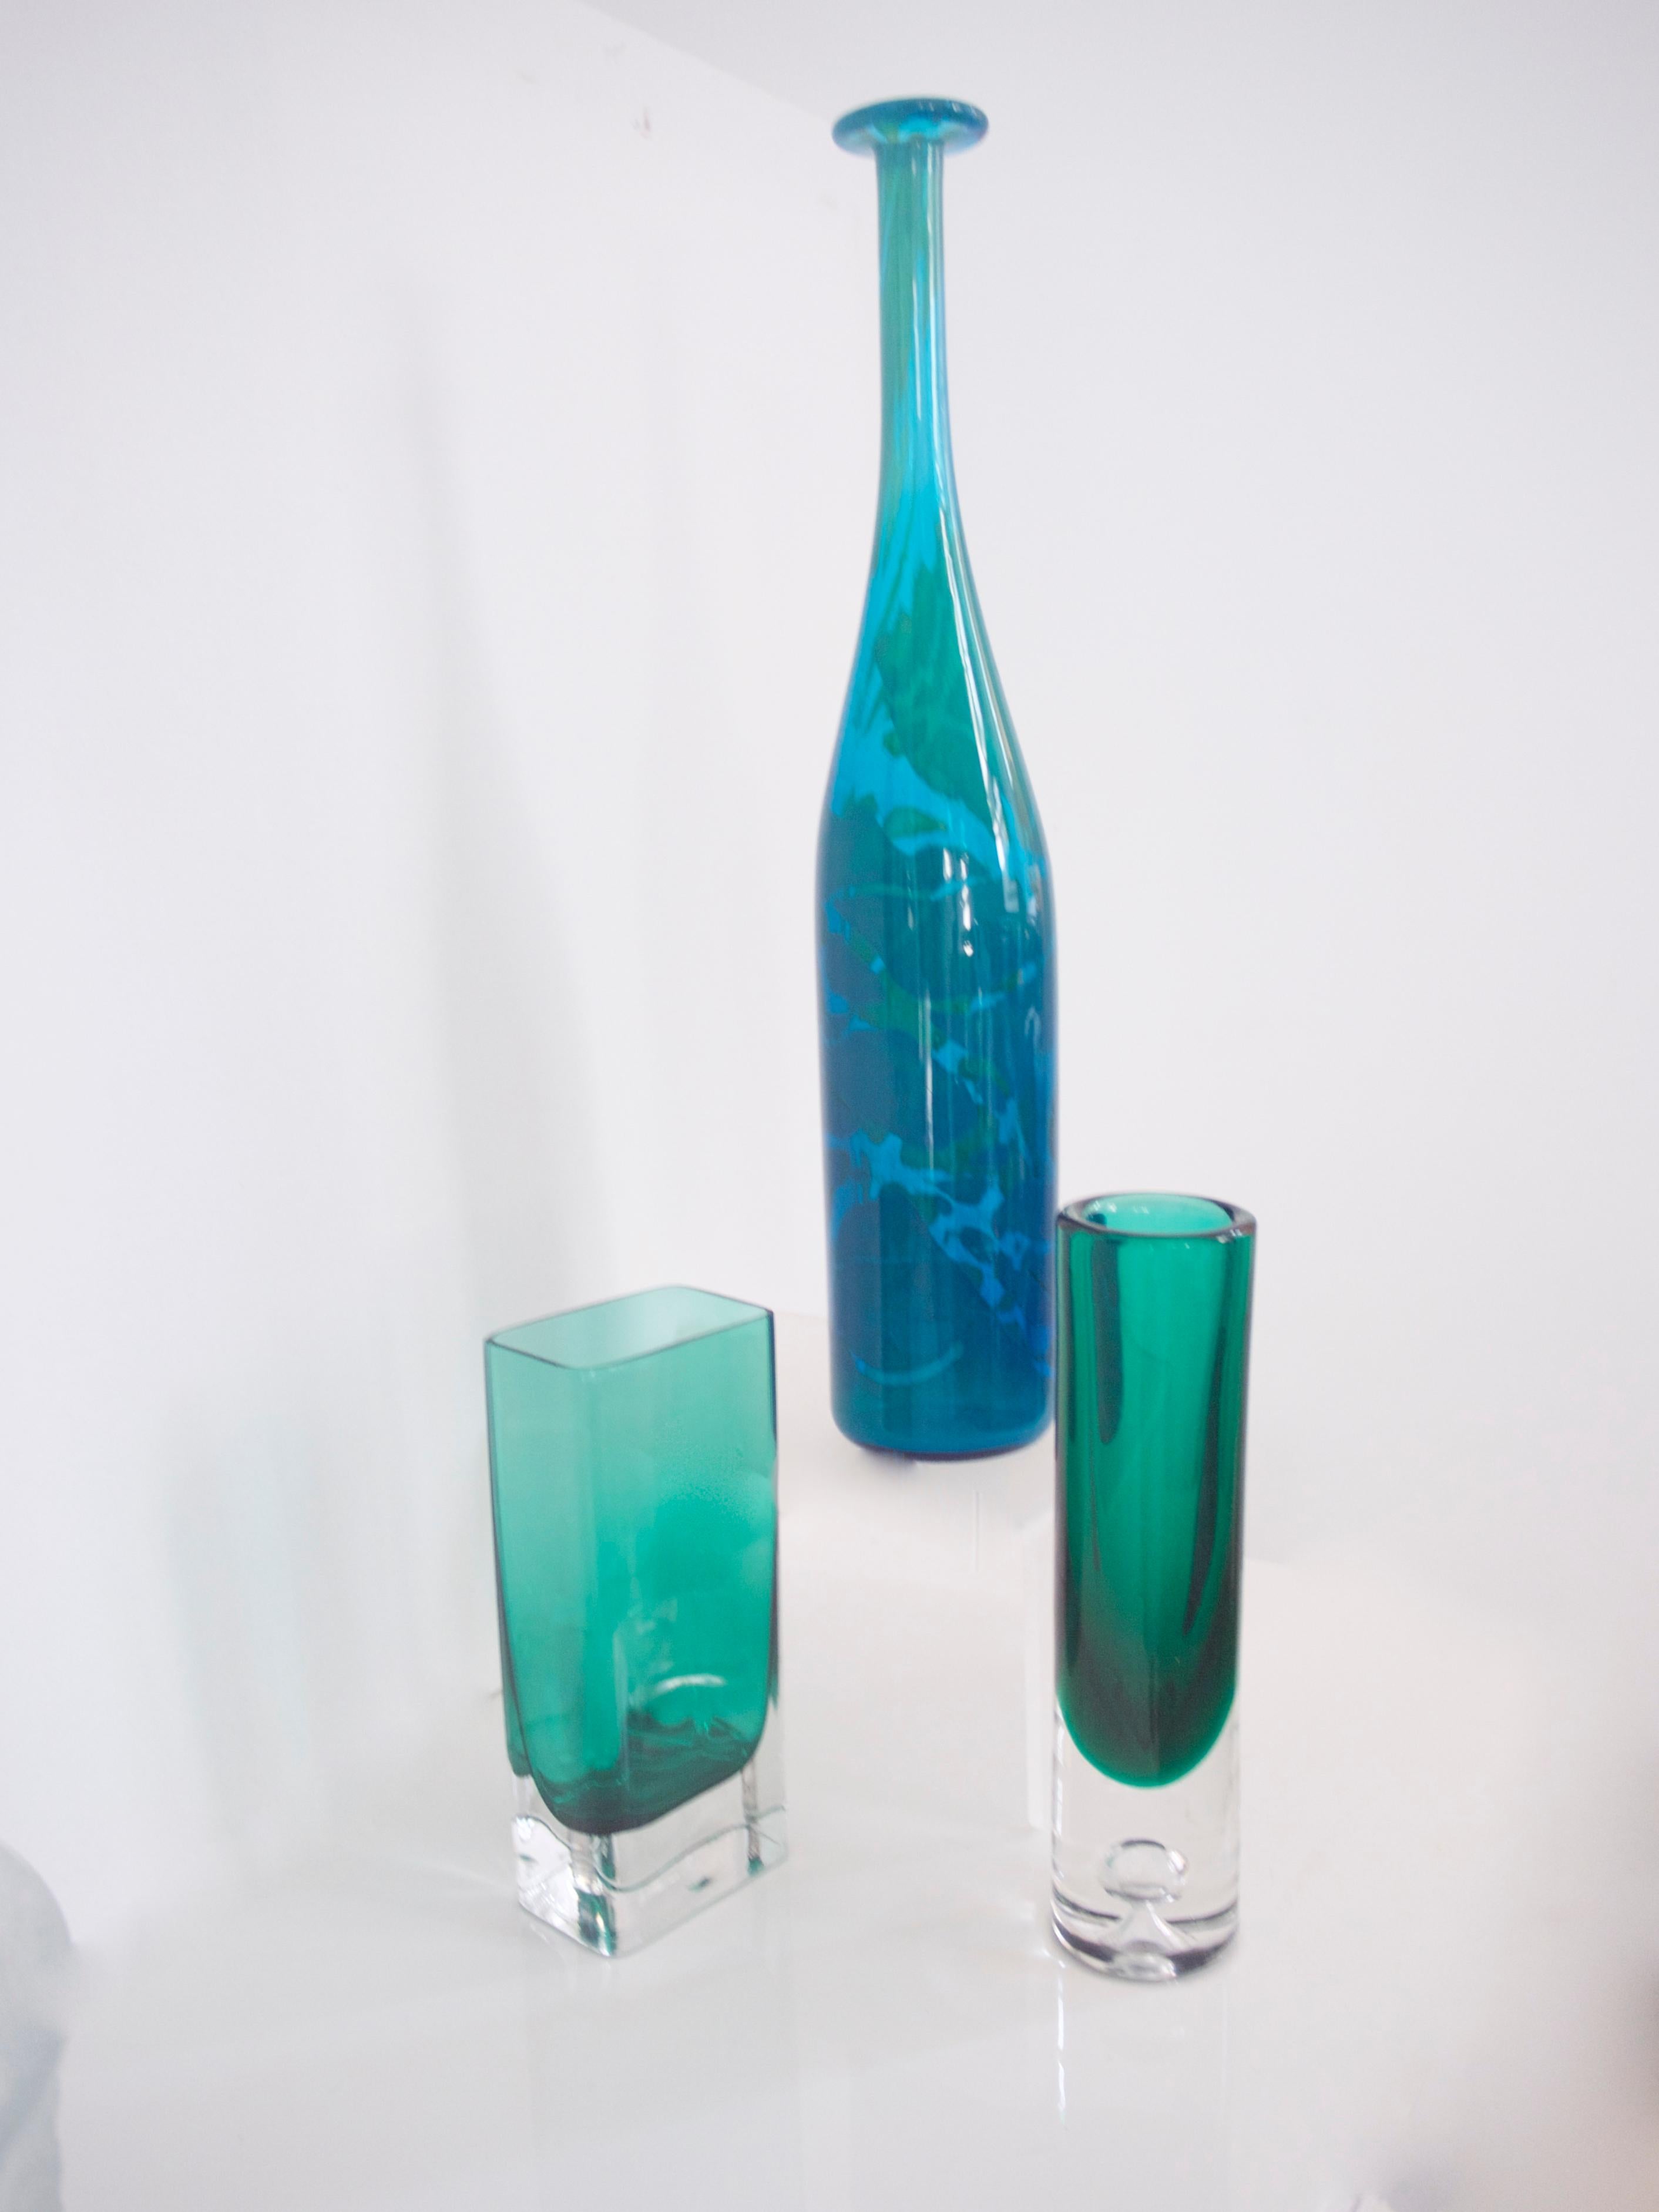 Pair of Scandinavian Modern Vases by Riihimaki, Finland, Late 1950s For Sale 3